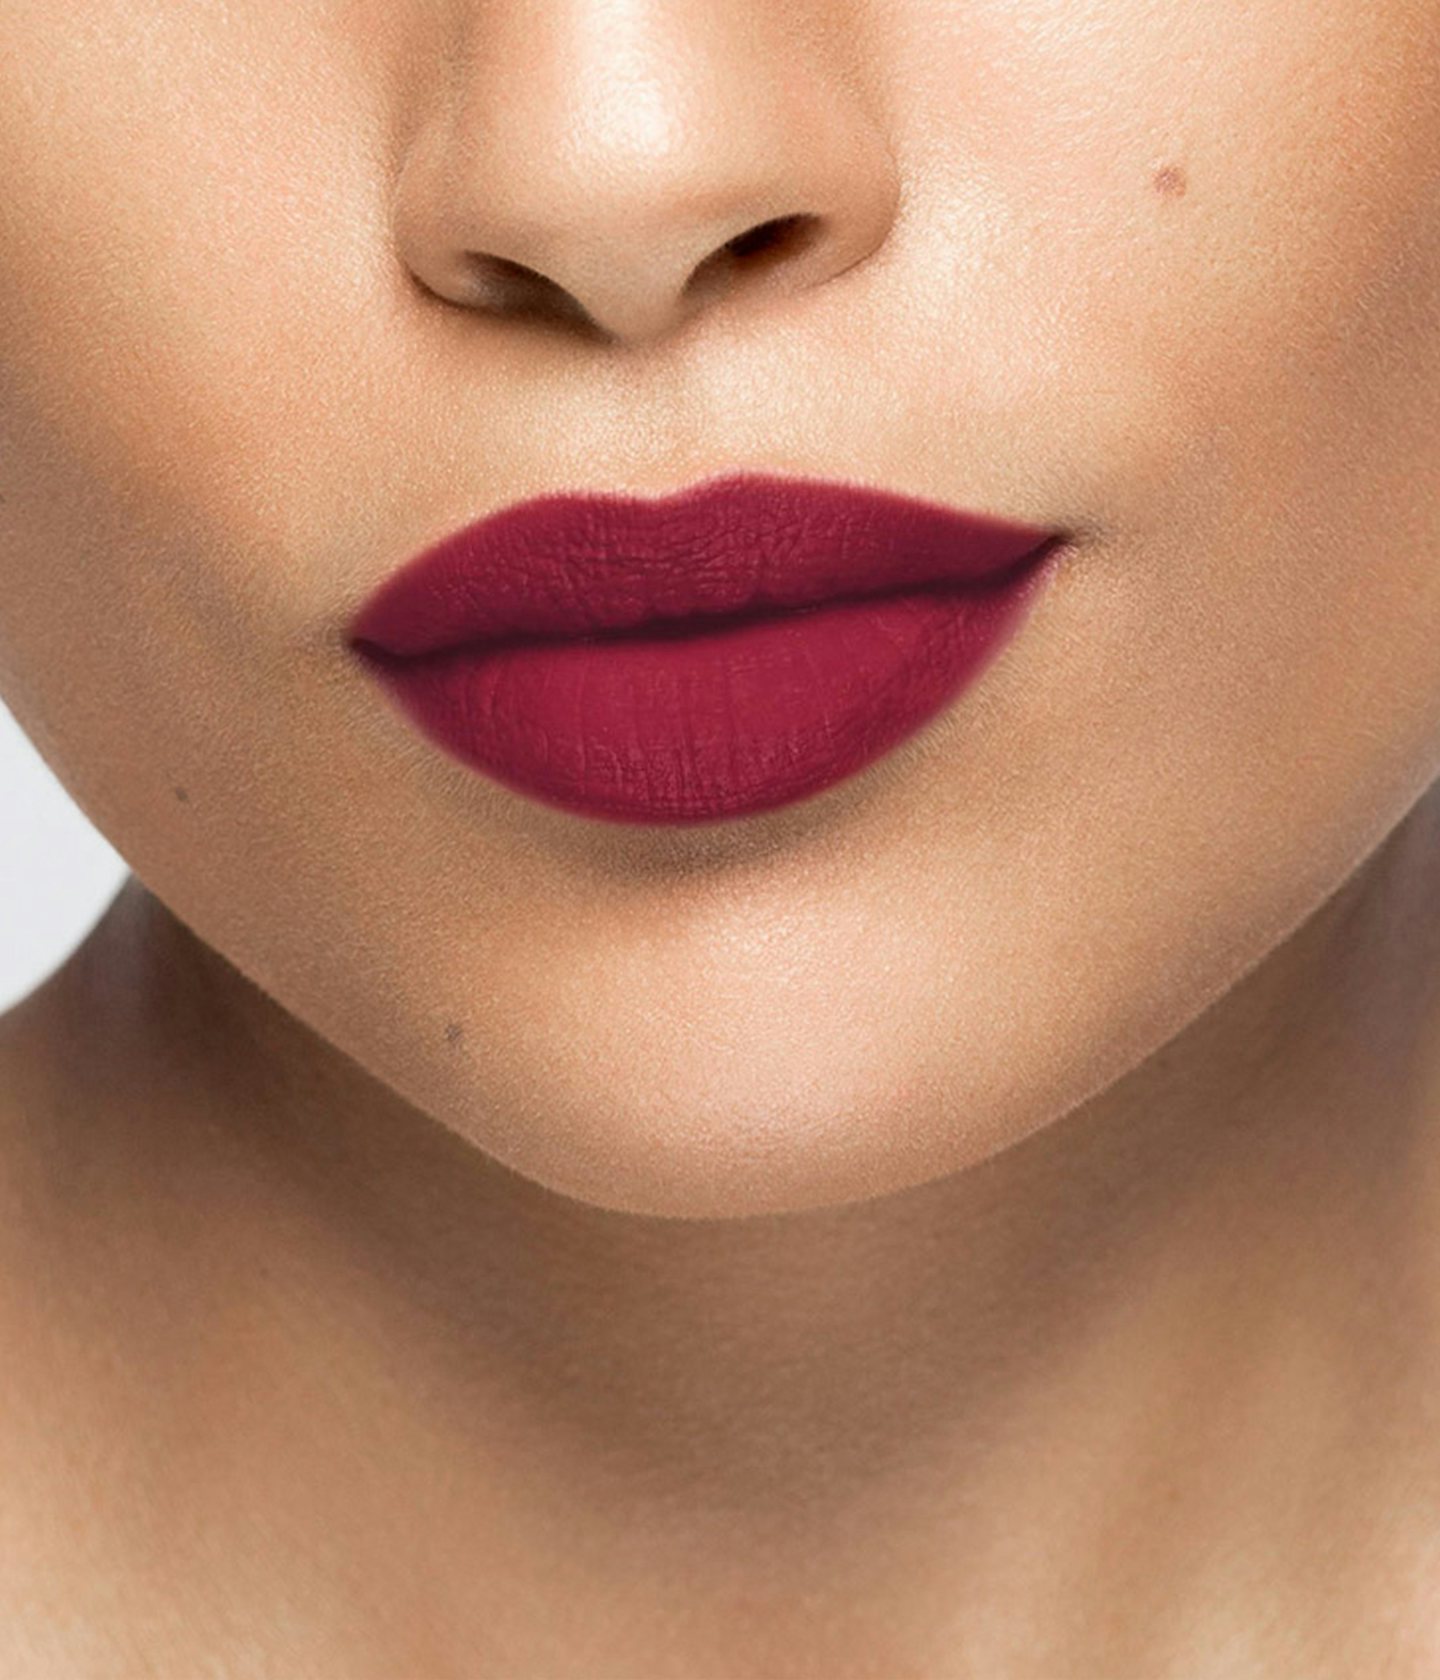 La bouche rouge Passionate Red lipstick shade on the lips of a medium skin model